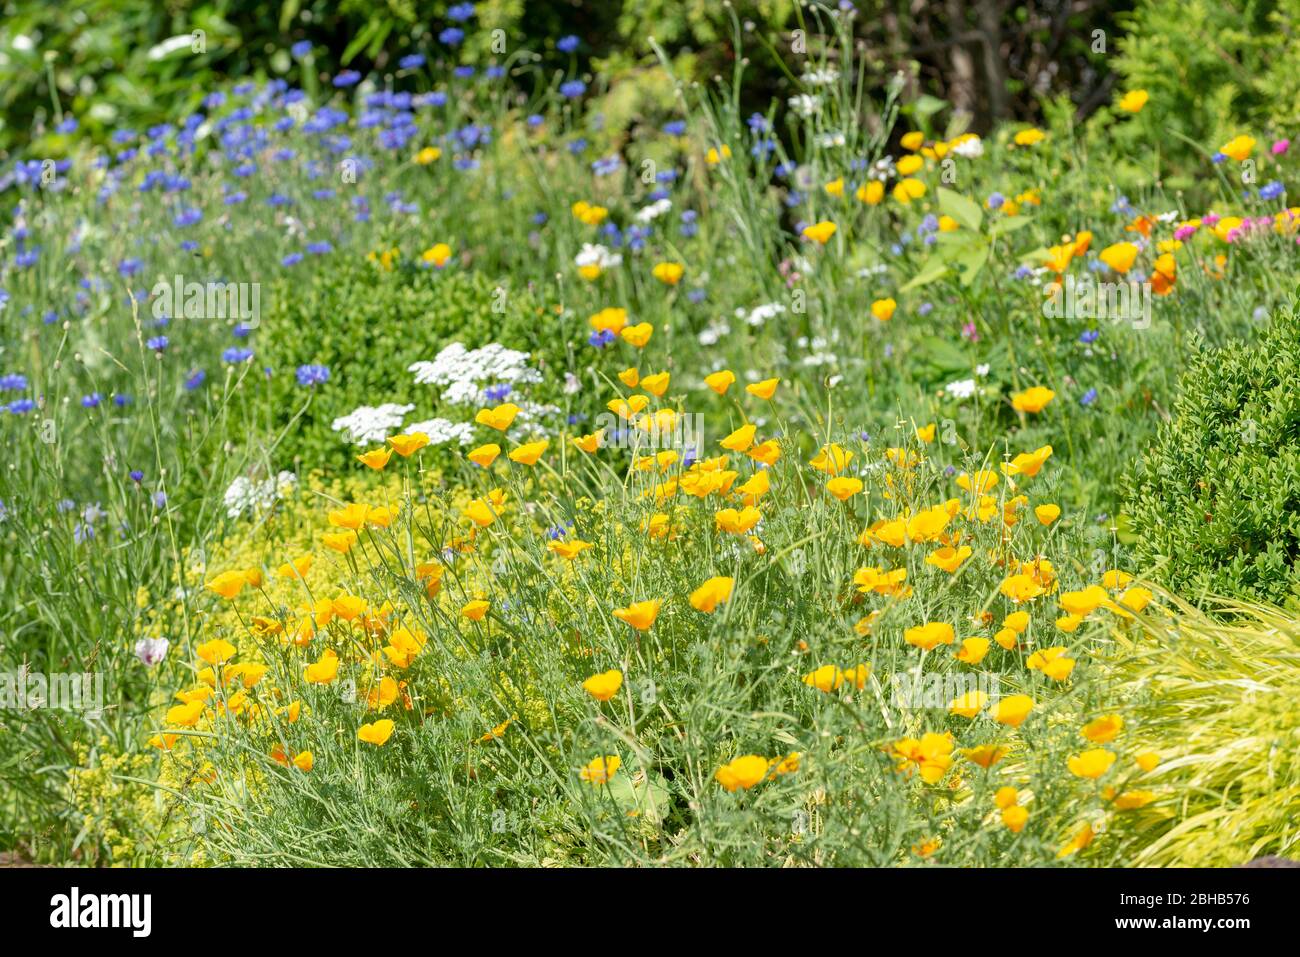 Garden with colorful ornamental flowers, flower meadow. Stock Photo